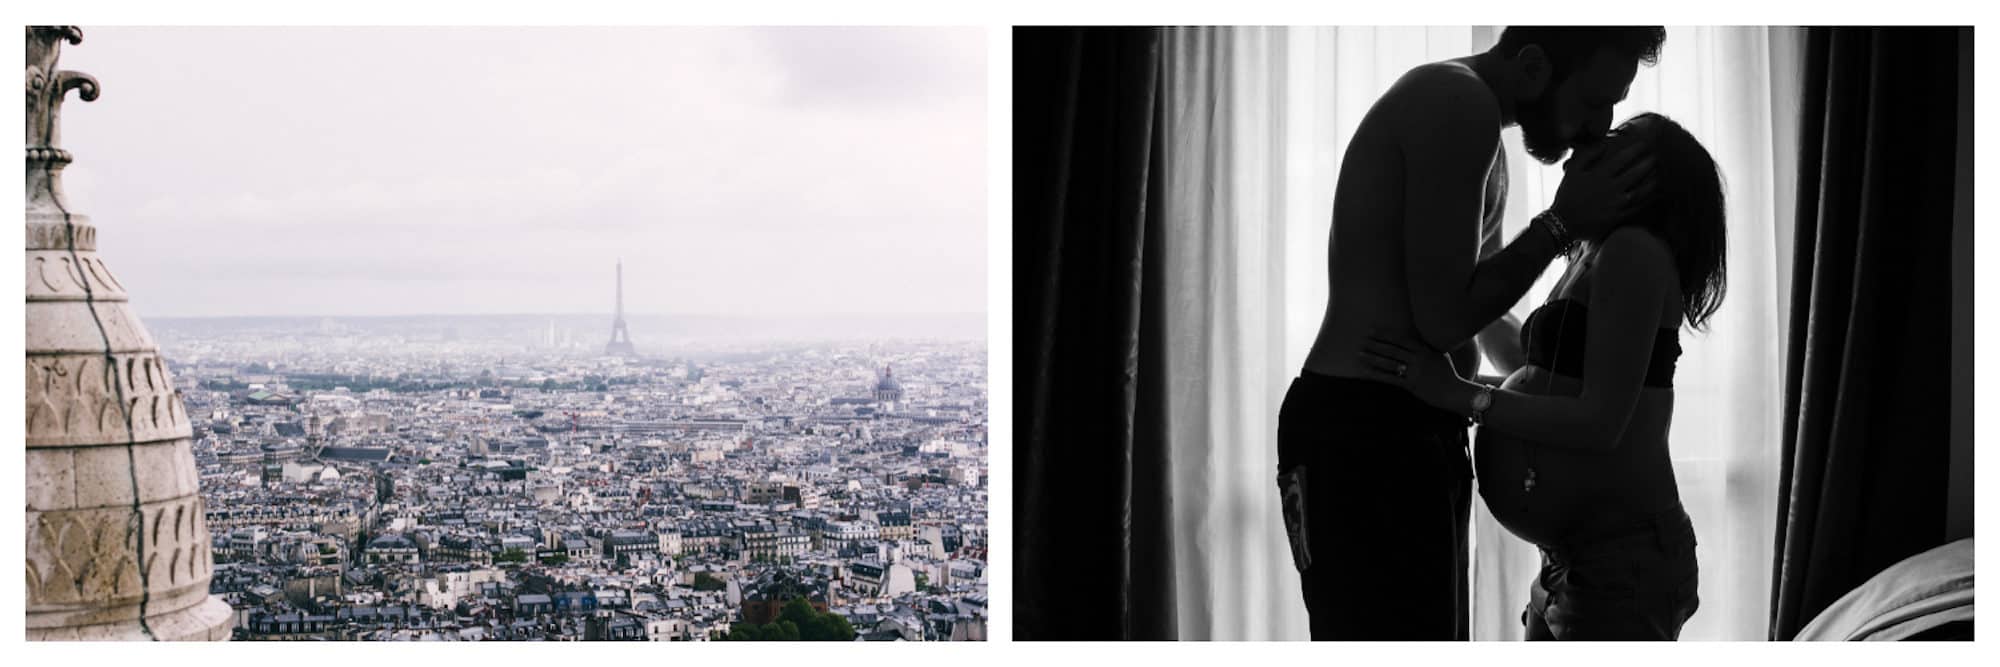 Panoramic Eiffel Tower view from above with Paris rooftops (Left). An artistic image of a couple in love kissing and the woman is very pregnant (right).